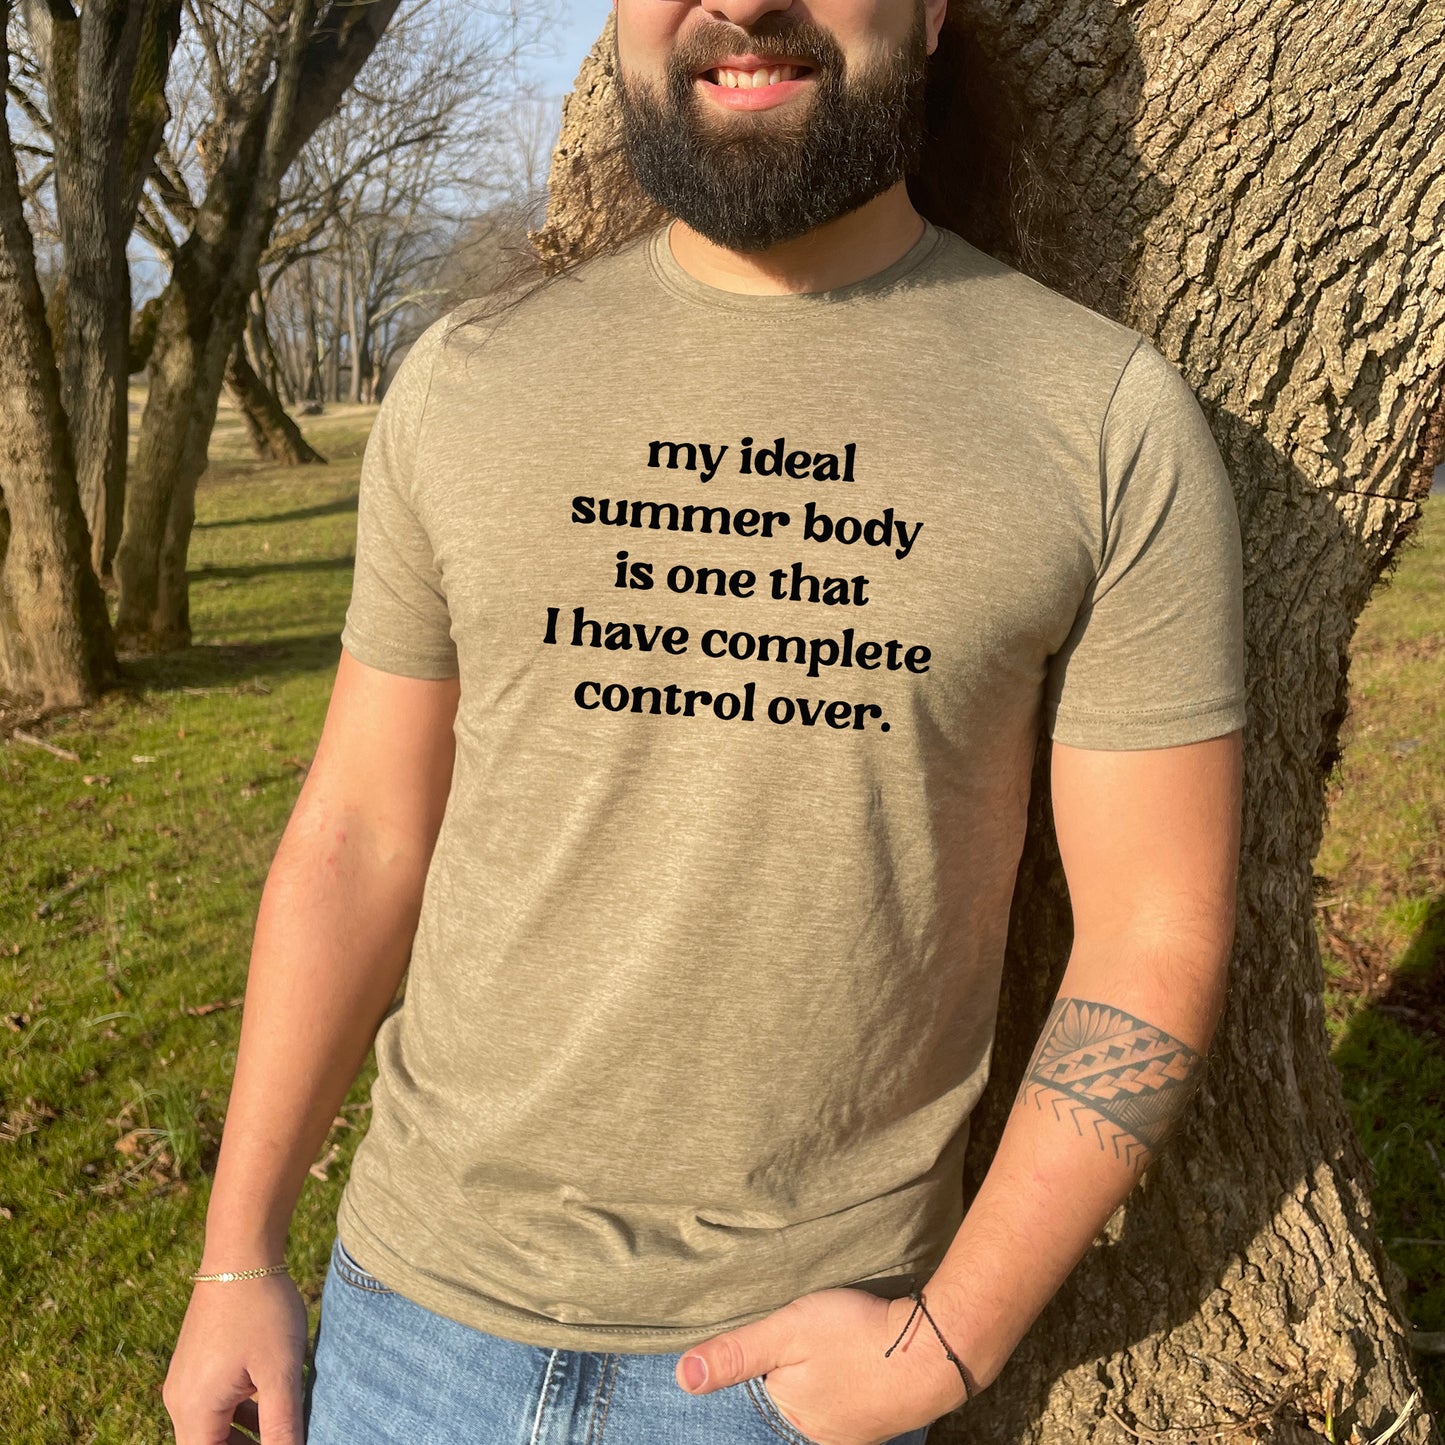 My Ideal Summer Body Is One I Have Complete Control Over - Men's / Unisex Tee - Stonewash Blue or Sage